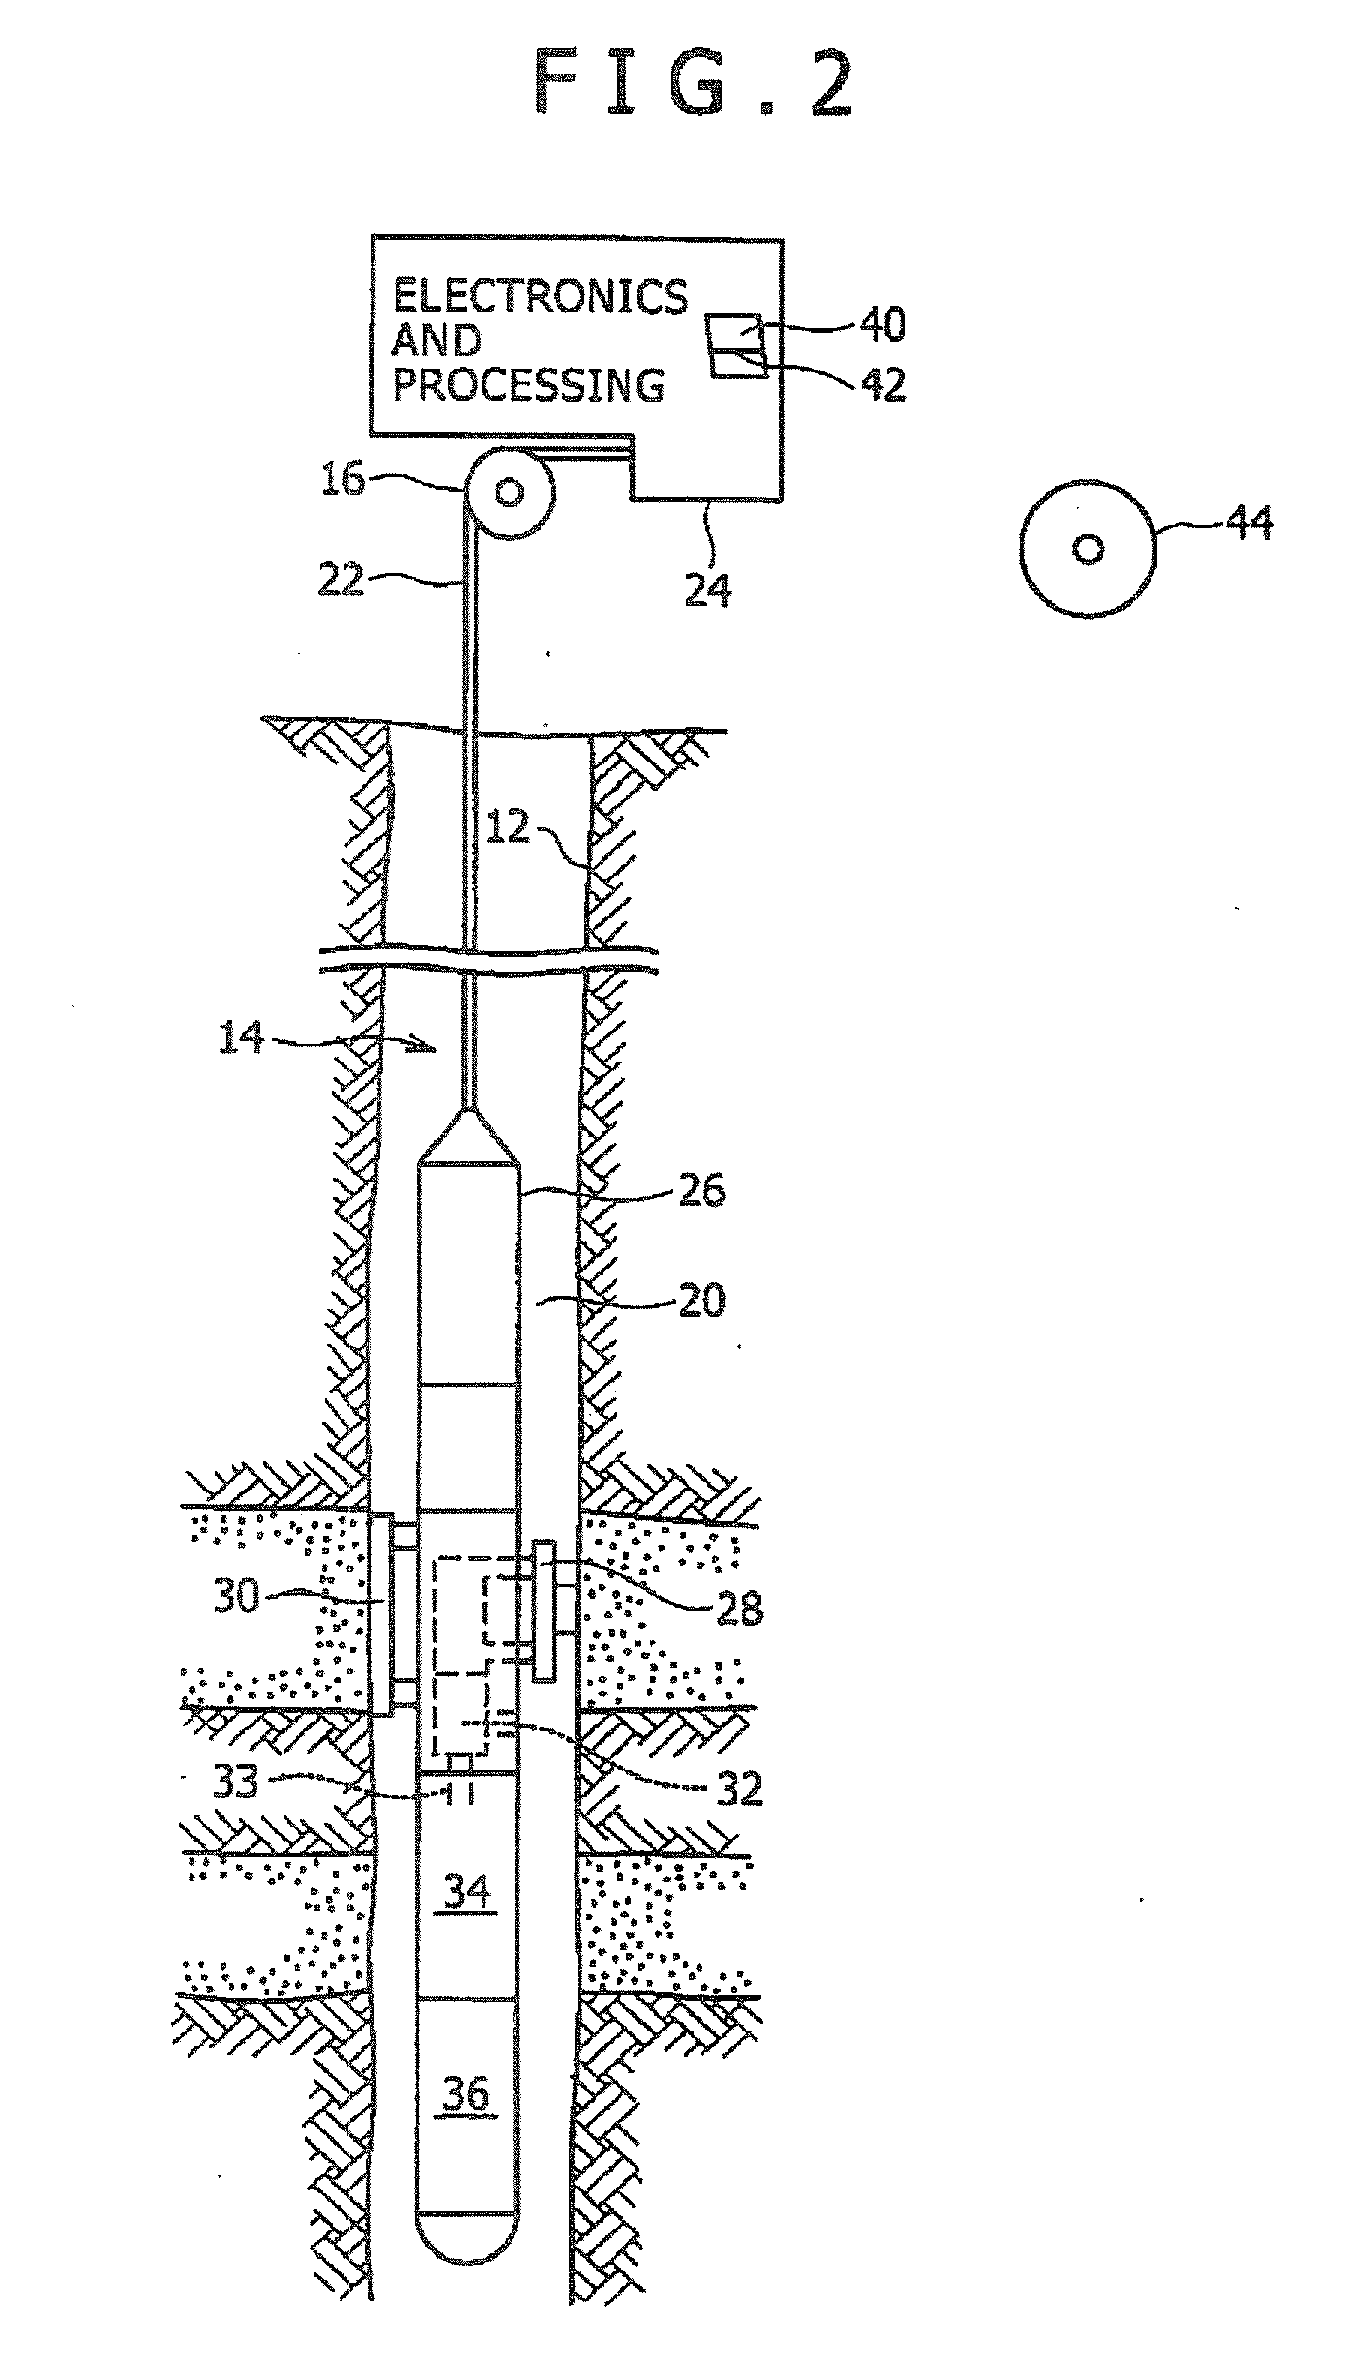 Method of downhole characterization of formation fluids, measurement controller for downhole characterization of formation fluids, and apparatus for downhole characterization of formation fluids